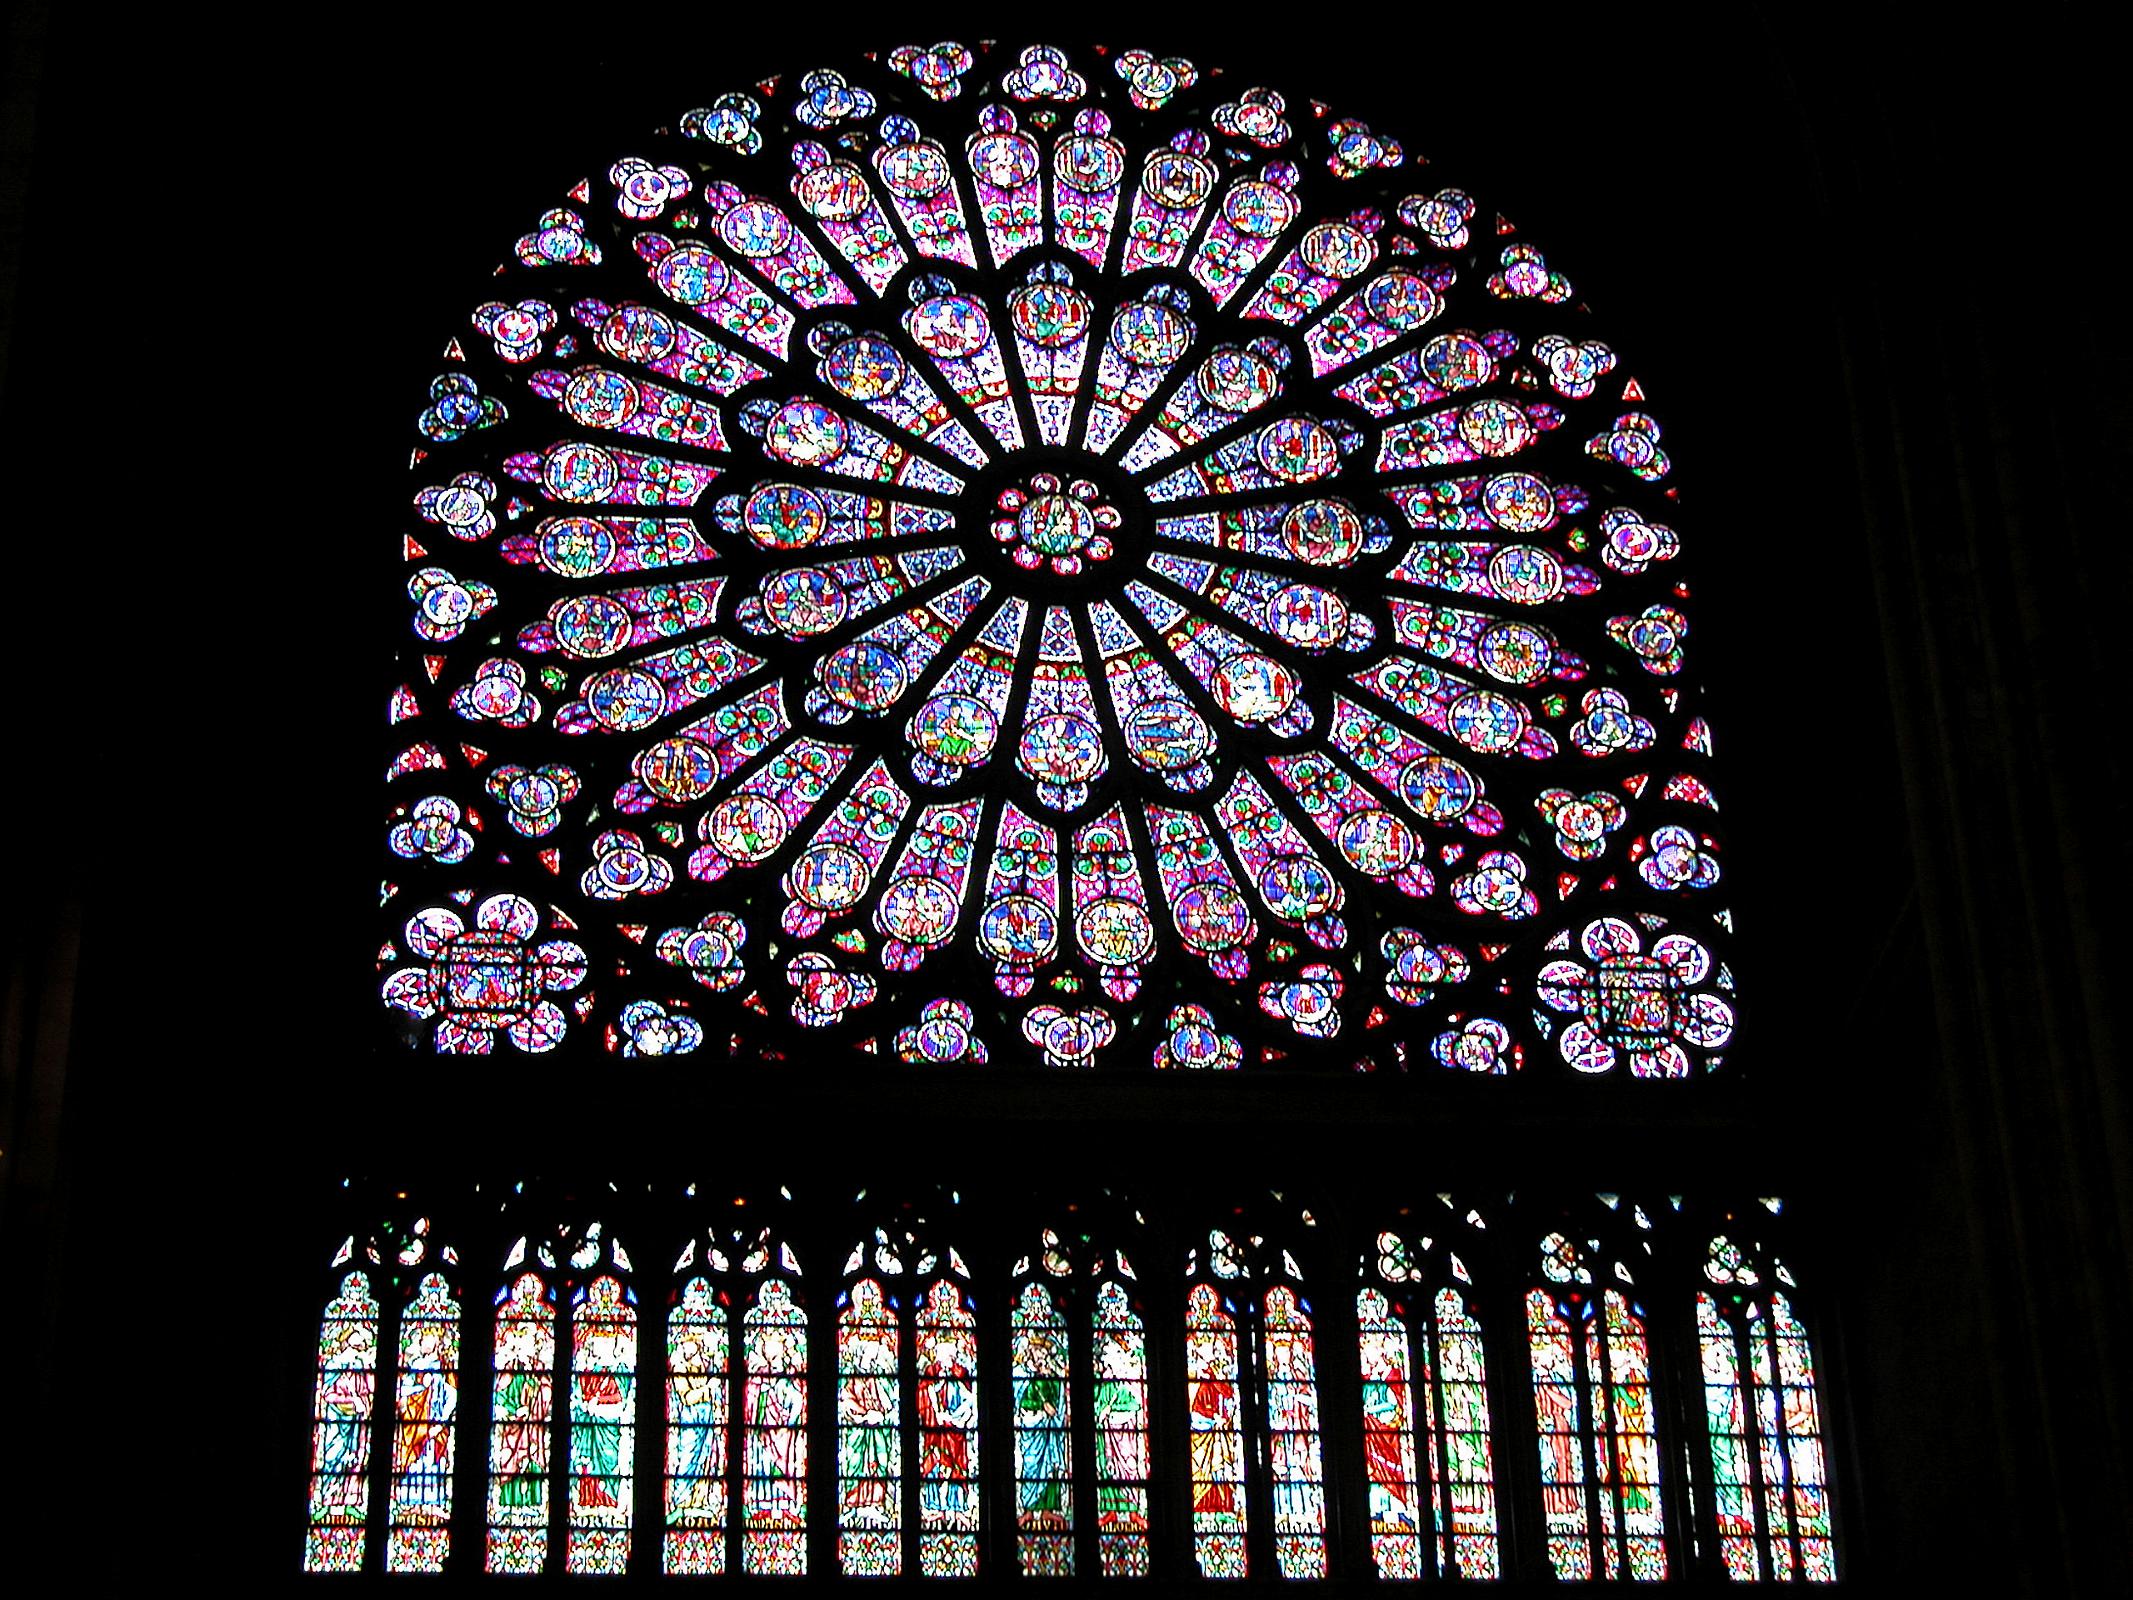 Paris 16 Notre Dame North Rose Window Centre Has Virgin Mary and Christ Child 